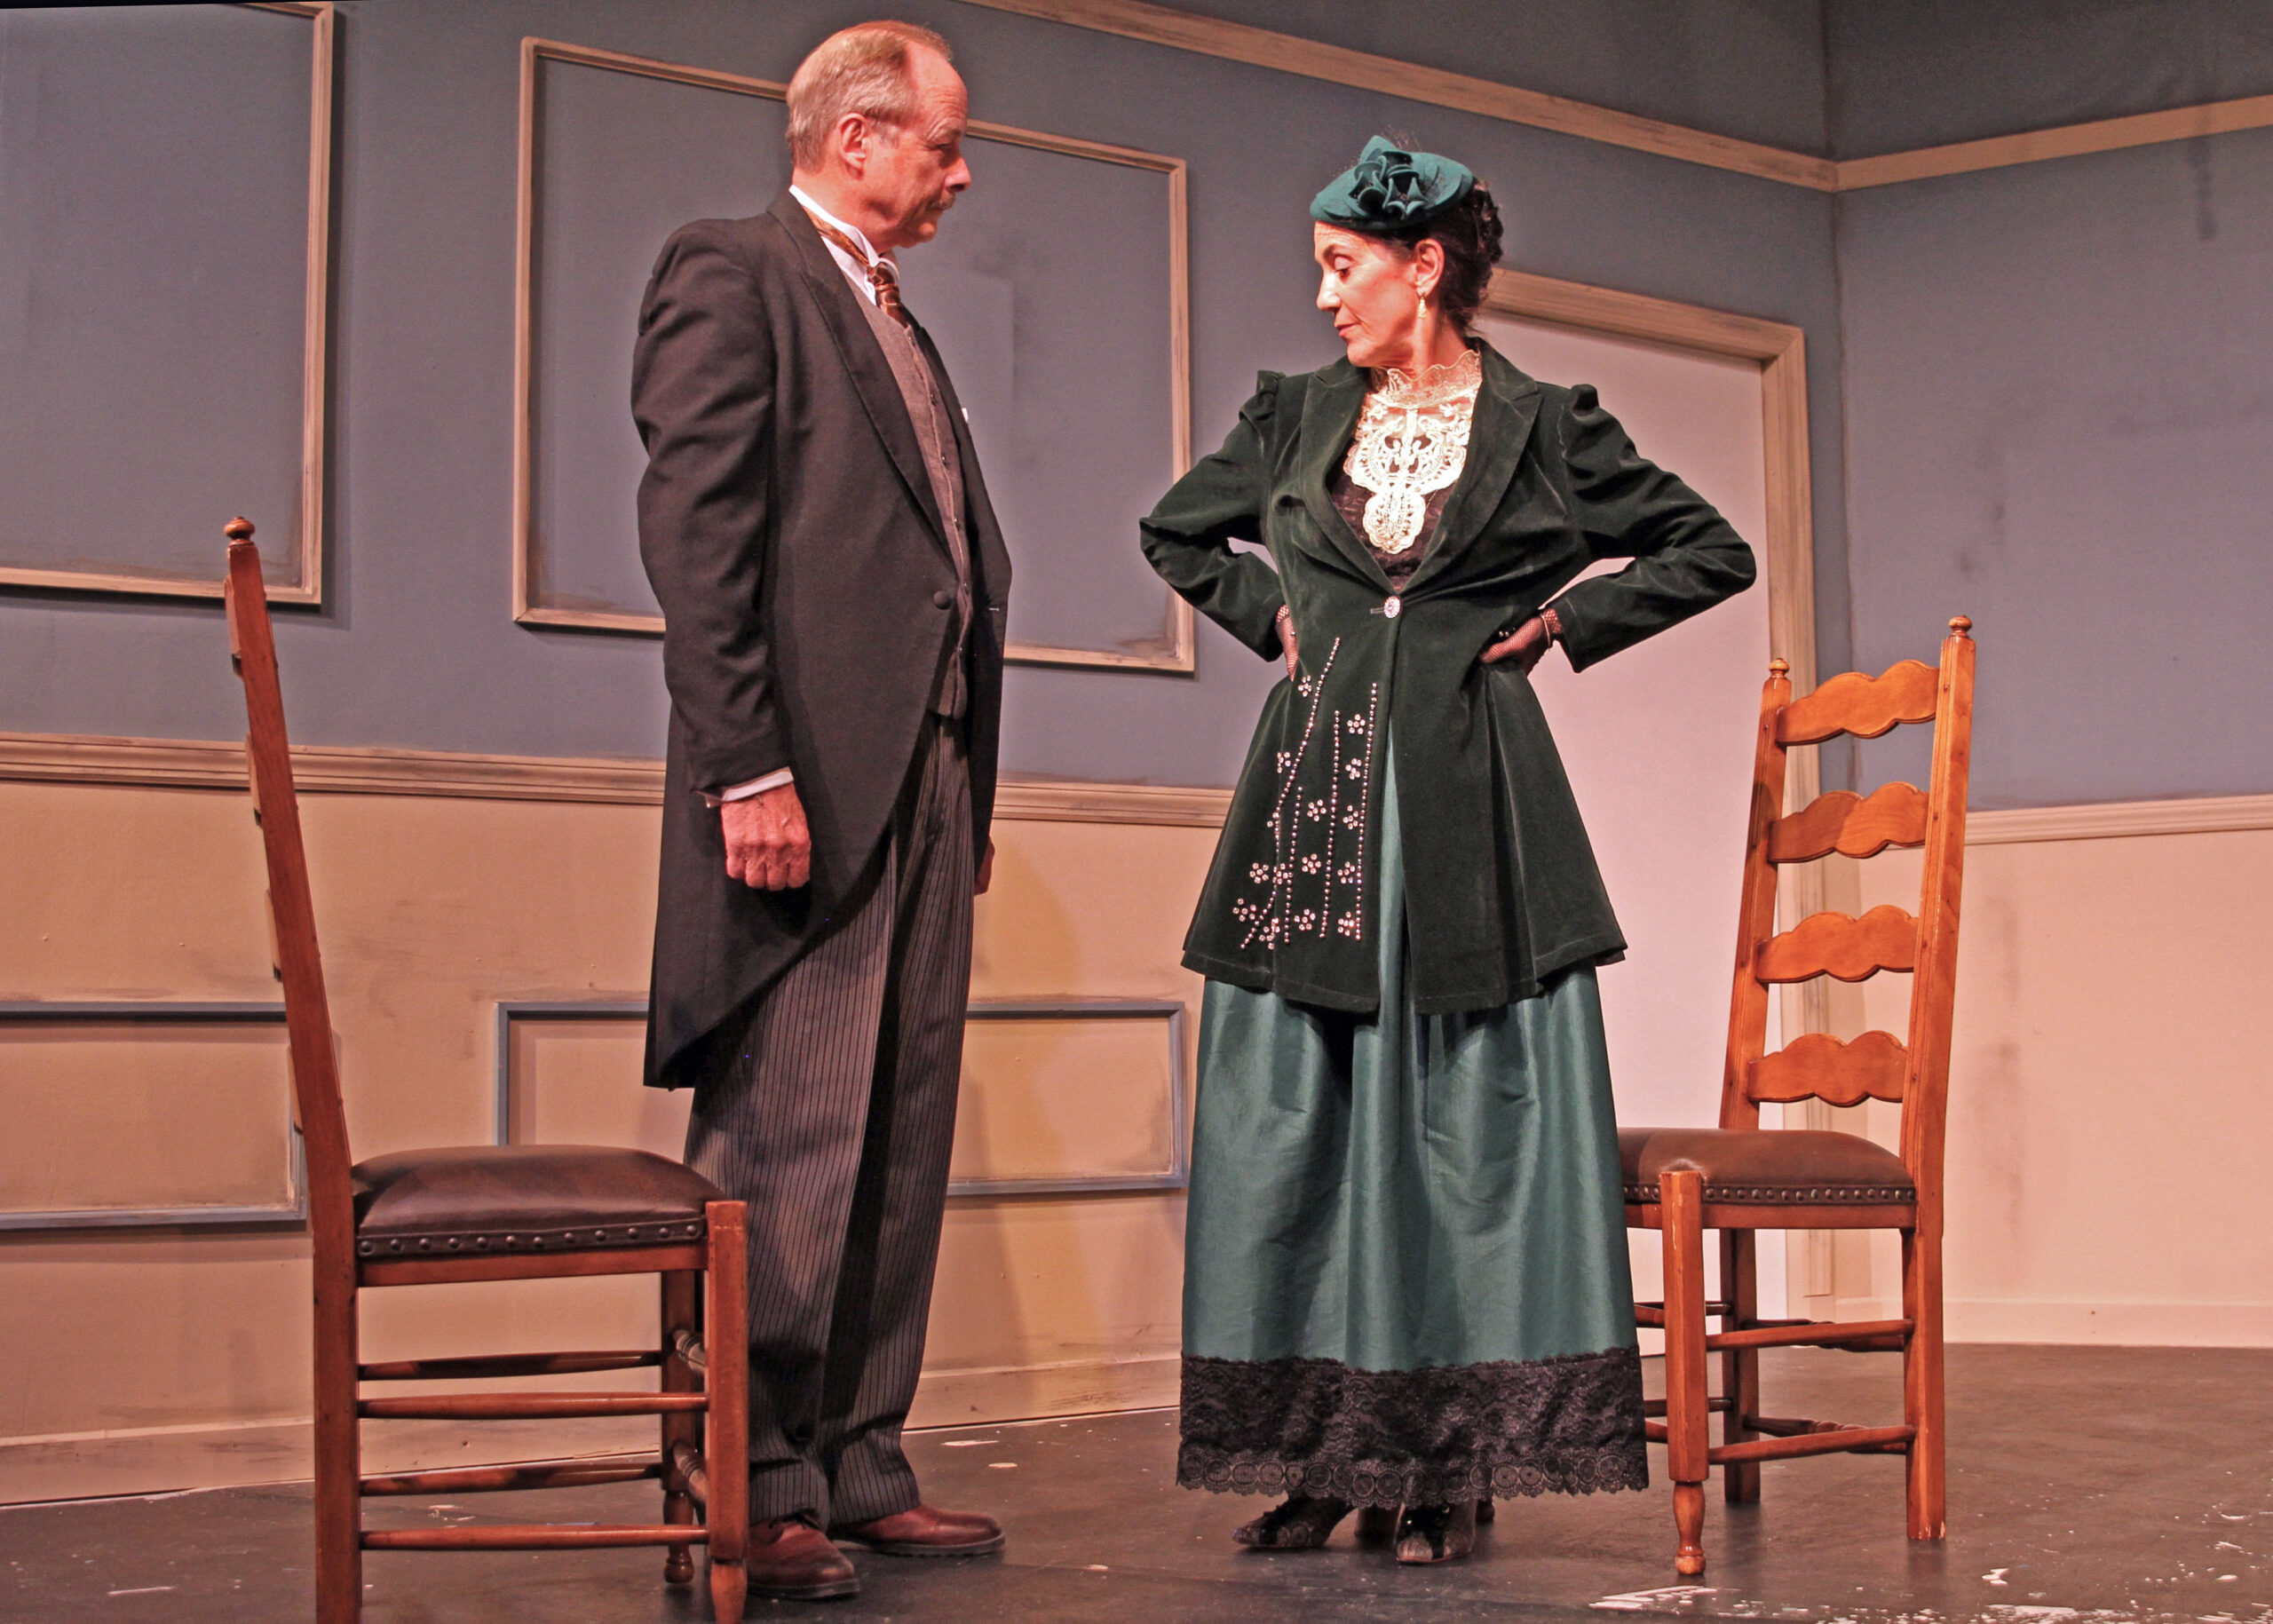 Andrew Botsford and Rosemary Cline in rehearsal for “A Doll’s House, Part 2” presented by Hampton Theatre Company running May 26 to June 12. TOM KOCHIE